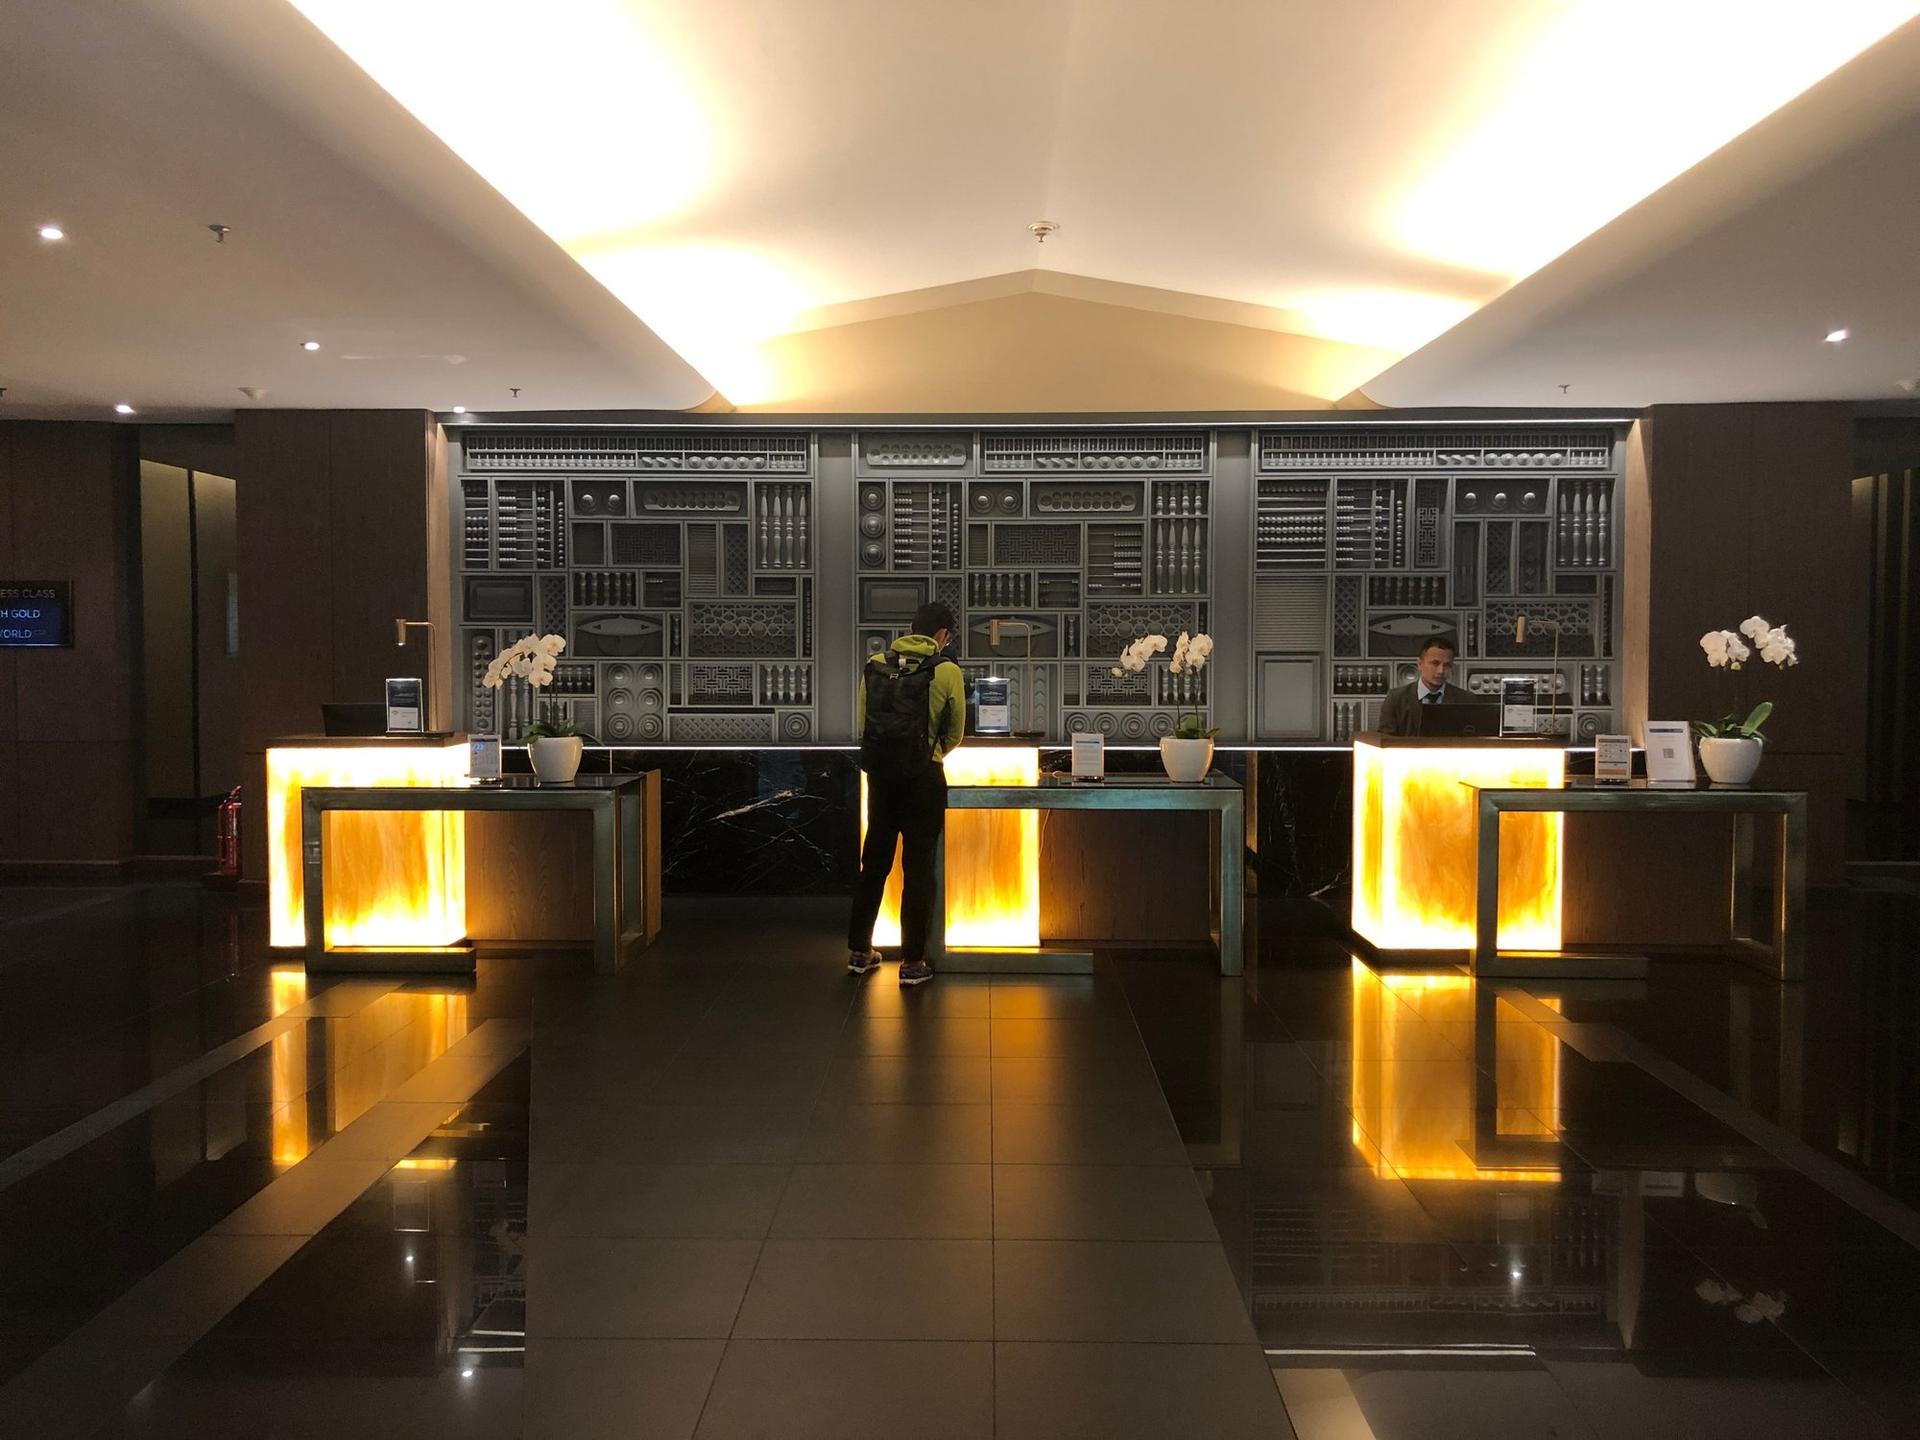 Malaysia Airlines Golden Business Class Lounge image 17 of 27